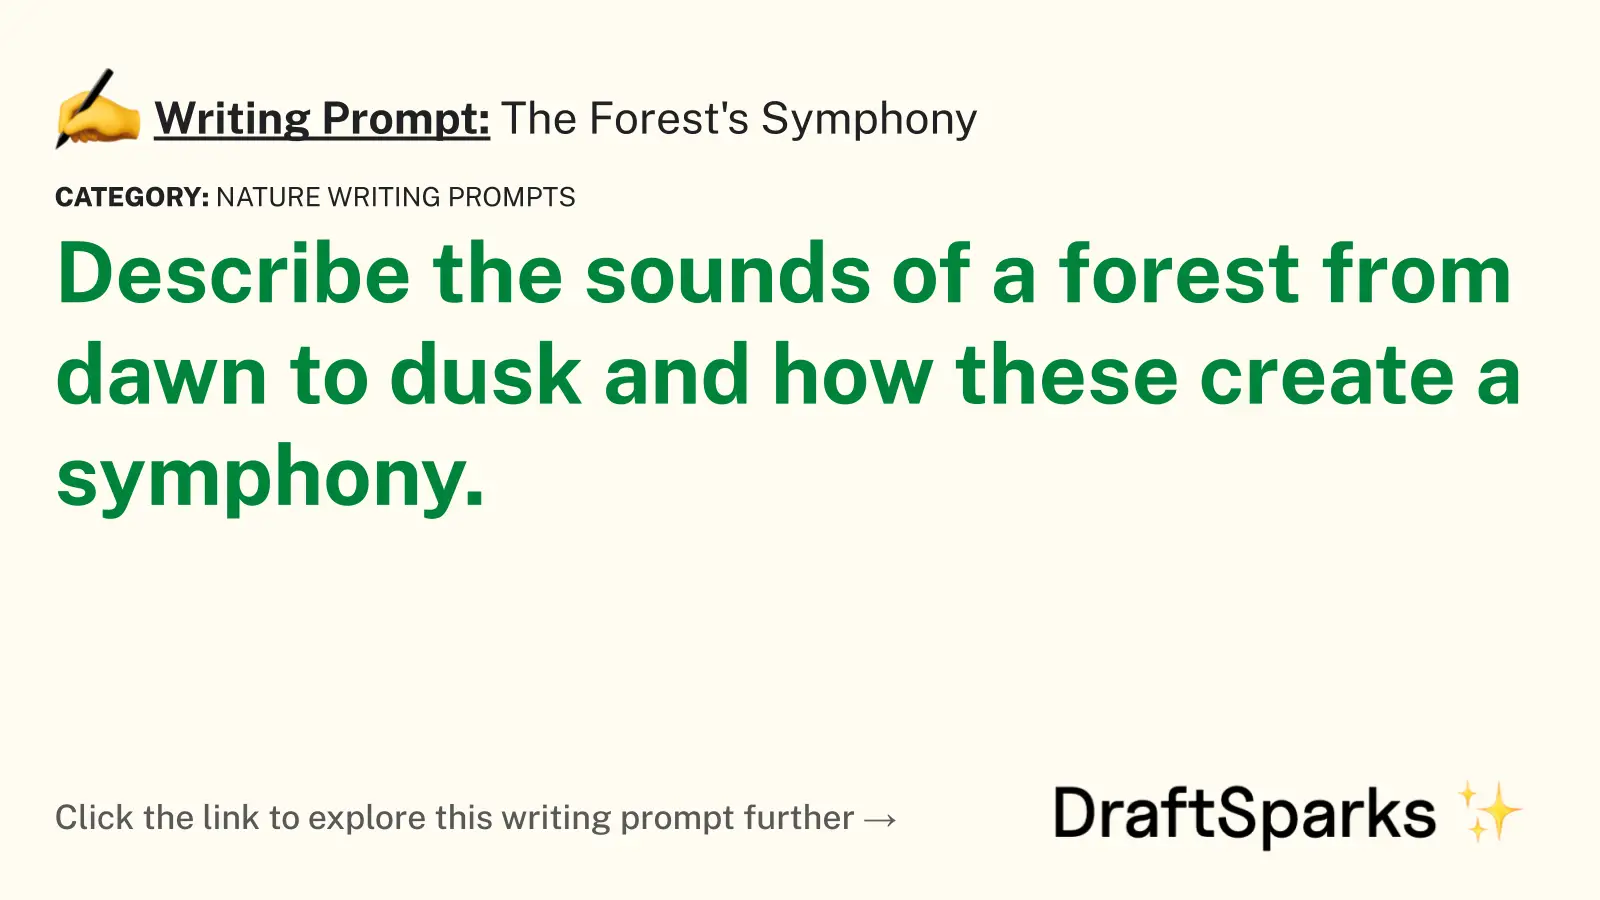 The Forest’s Symphony